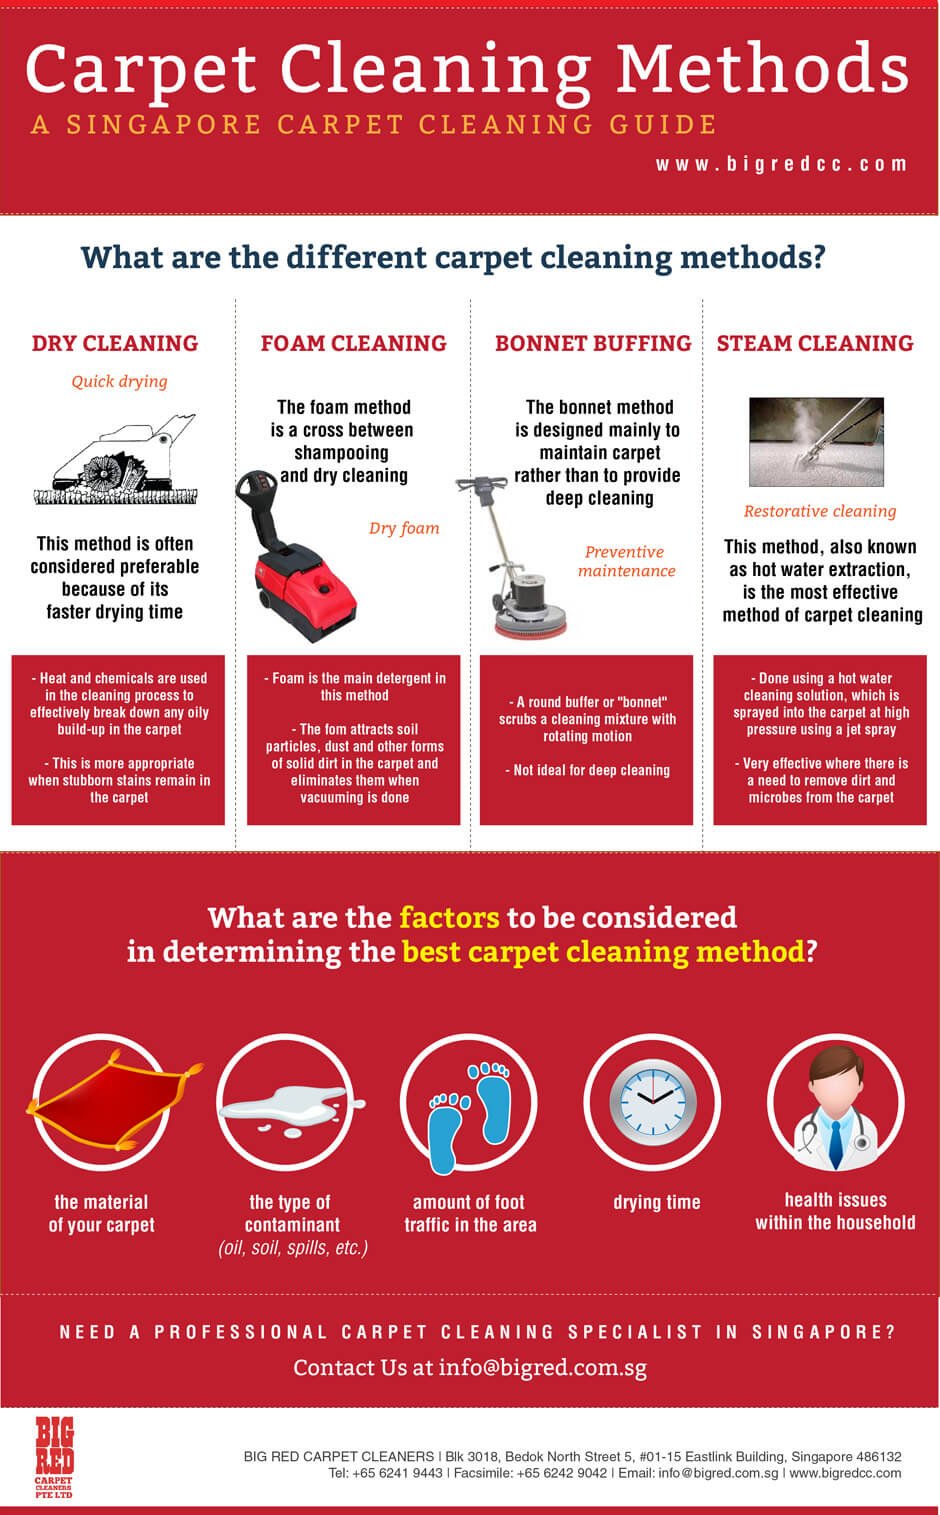 Blenheim Carpet Care NZ Uses The Most Effective Carpet Cleaning Method